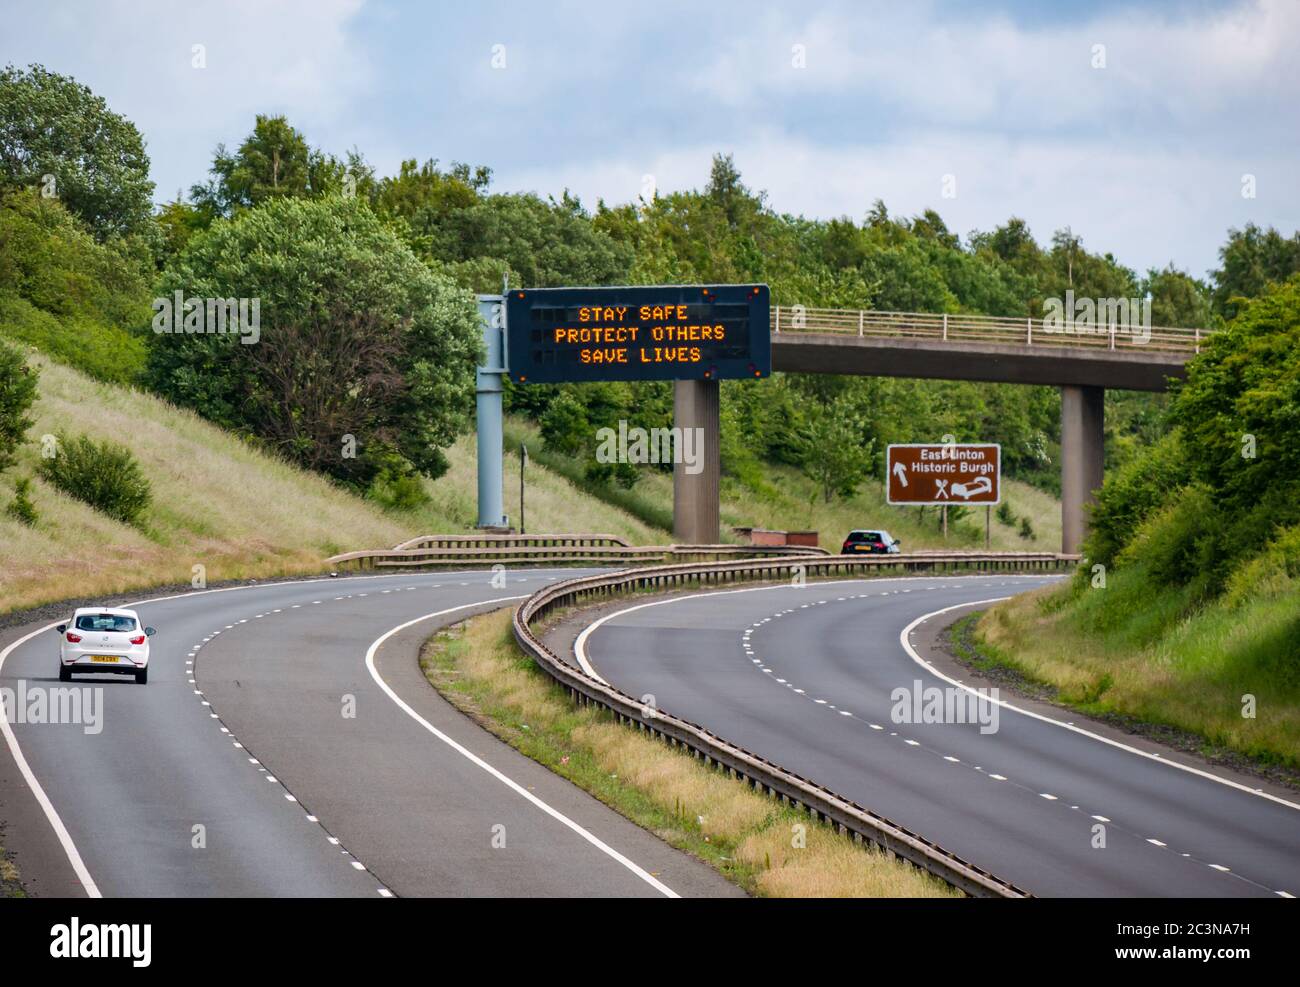 Traffic on A1 with new Covid-19 pandemic message on gantry 'Stay Safe Protect Others Save Lives', East Lothian, Scotland, UK Stock Photo